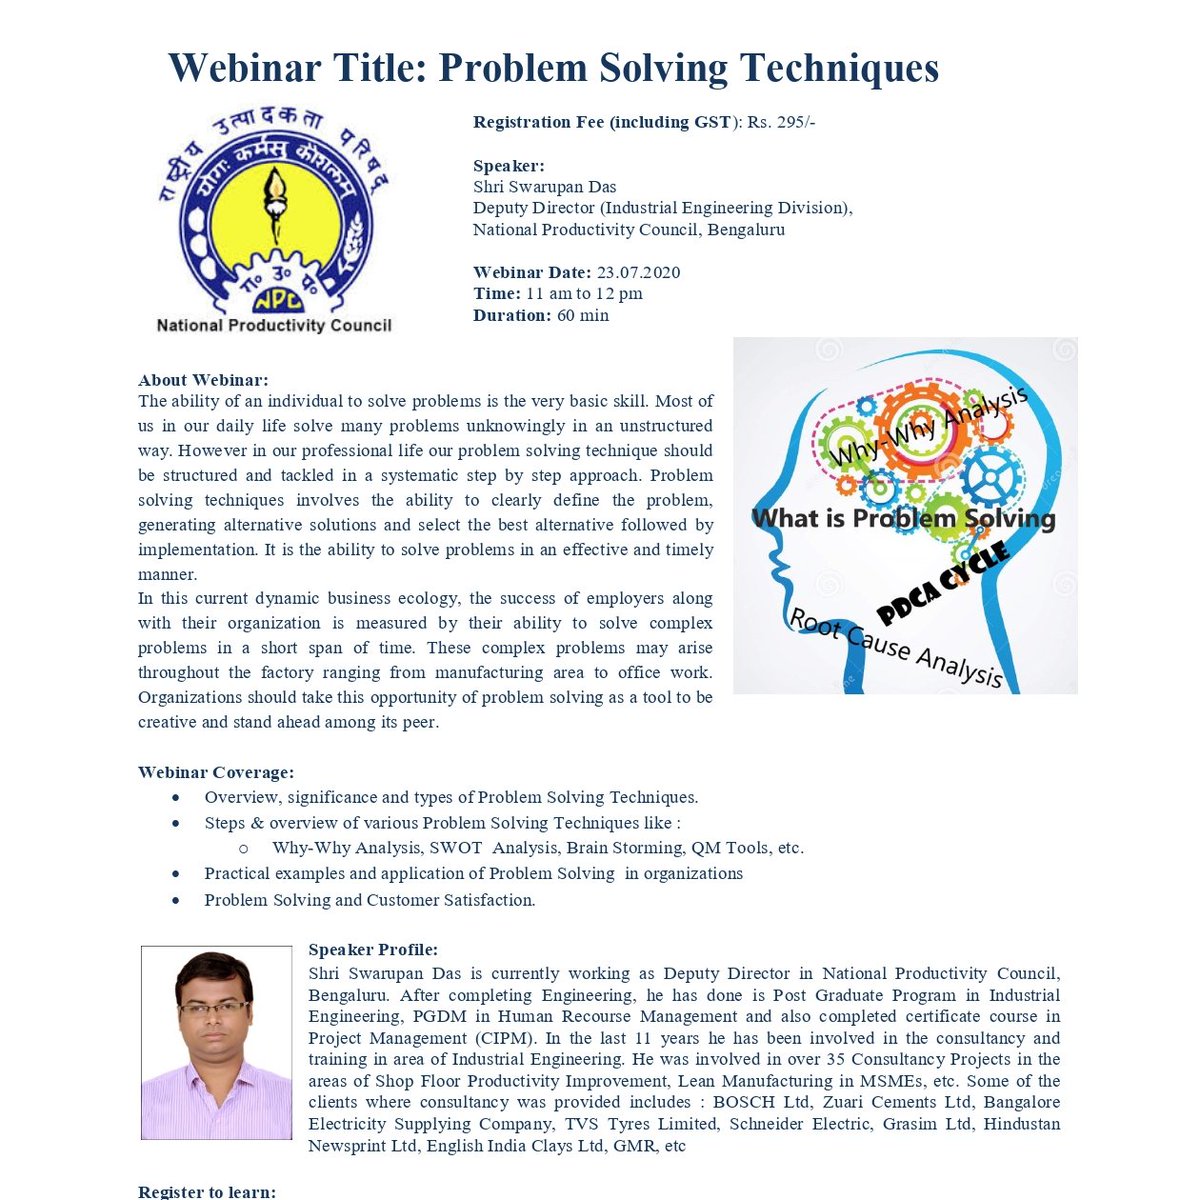 Join #npc #webinar on #ProblemSolving techniques on 23rd July 2020.
Know how to choose the appropriate tools for Problem Solving.
#npcindiaforproductivity
@BHEL_India @cmdbeml @HALHQBLR @KASSIA1949 @ELCIA_IN @BLRAirport @NammaBESCOM